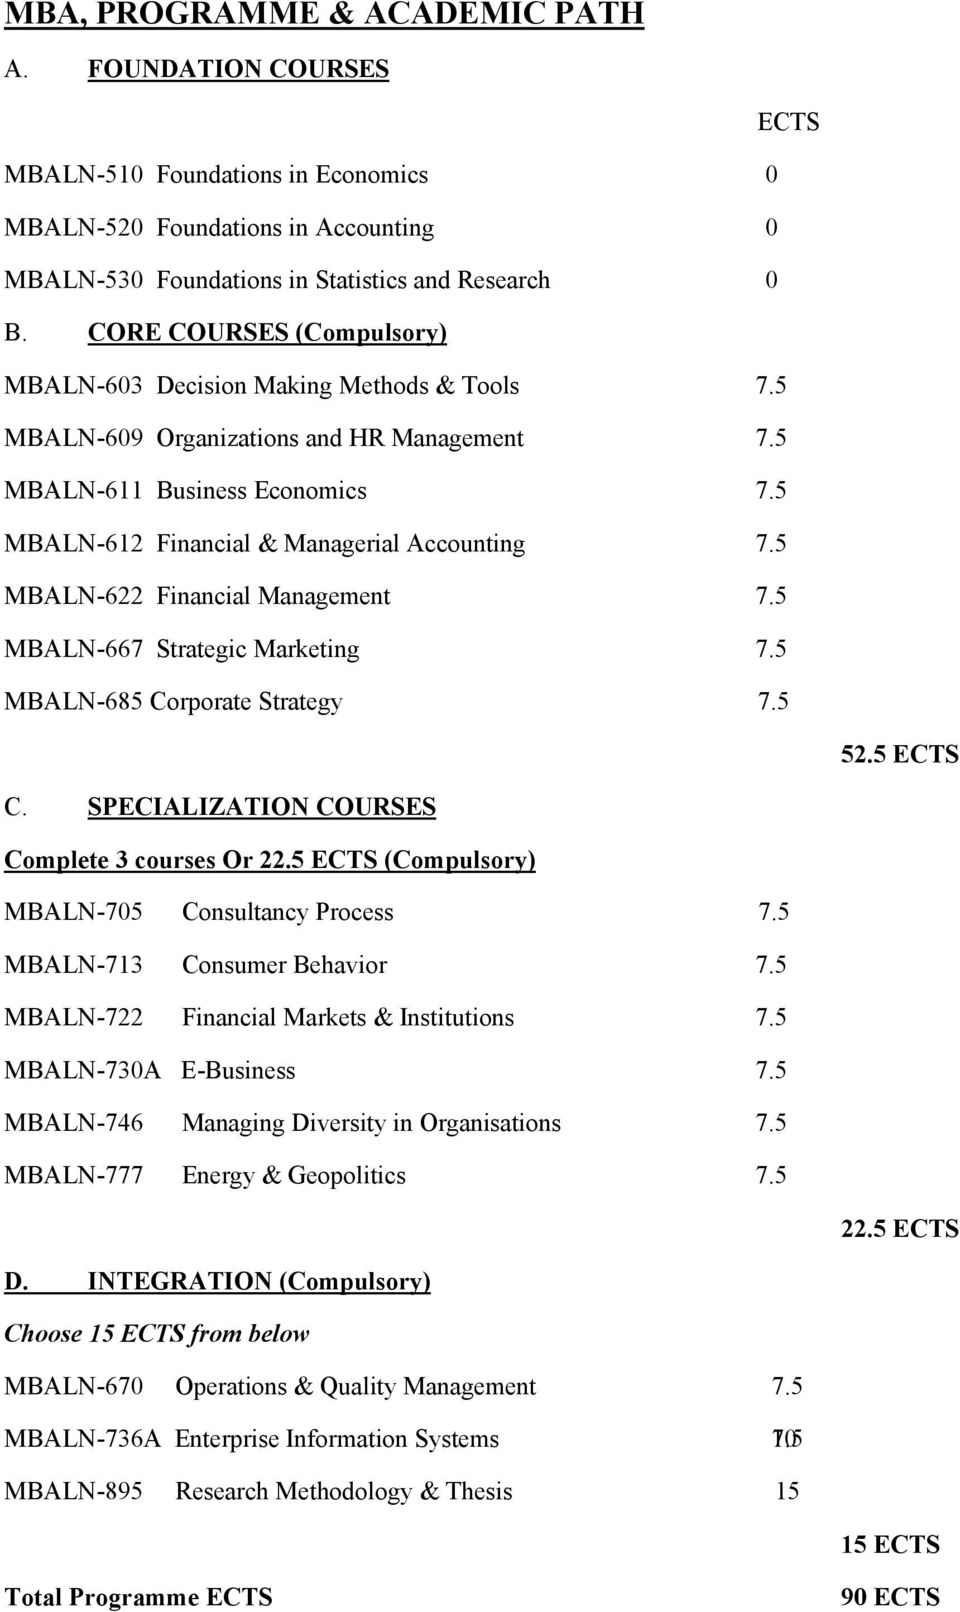 5 MBALN-622 Financial Management 7.5 MBALN-667 Strategic Marketing 7.5 MBALN-685 Corporate Strategy 7.5 52.5 ECTS C. SPECIALIZATION COURSES Complete 3 courses Or 22.